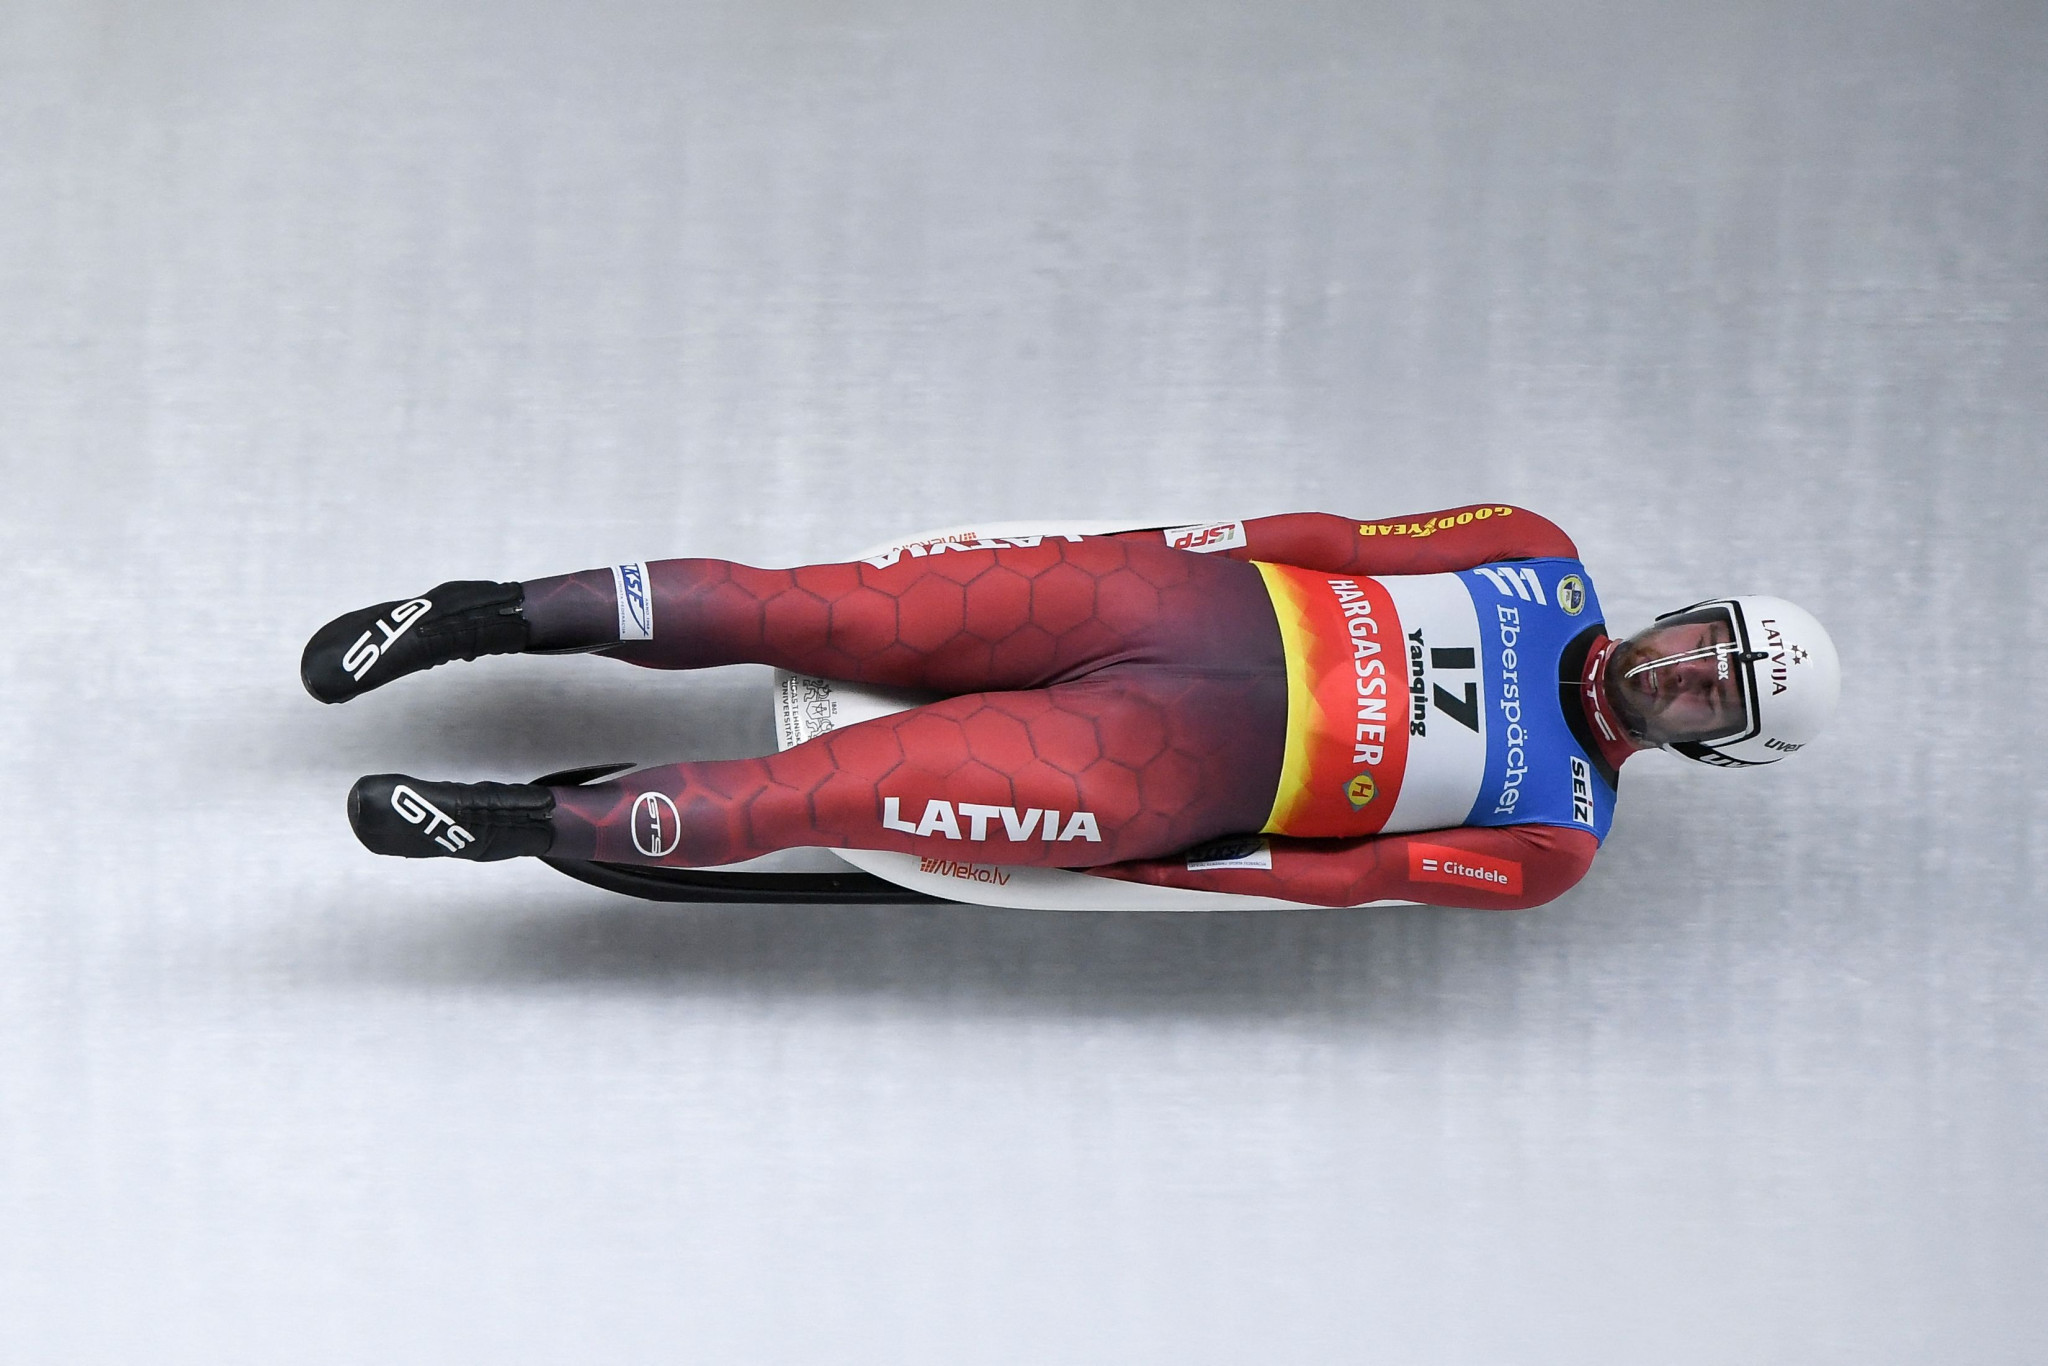 Latvia's Kristers Aparjods secured a historic Luge World Cup victory in 1:42.881 in Sochi ©Getty Images